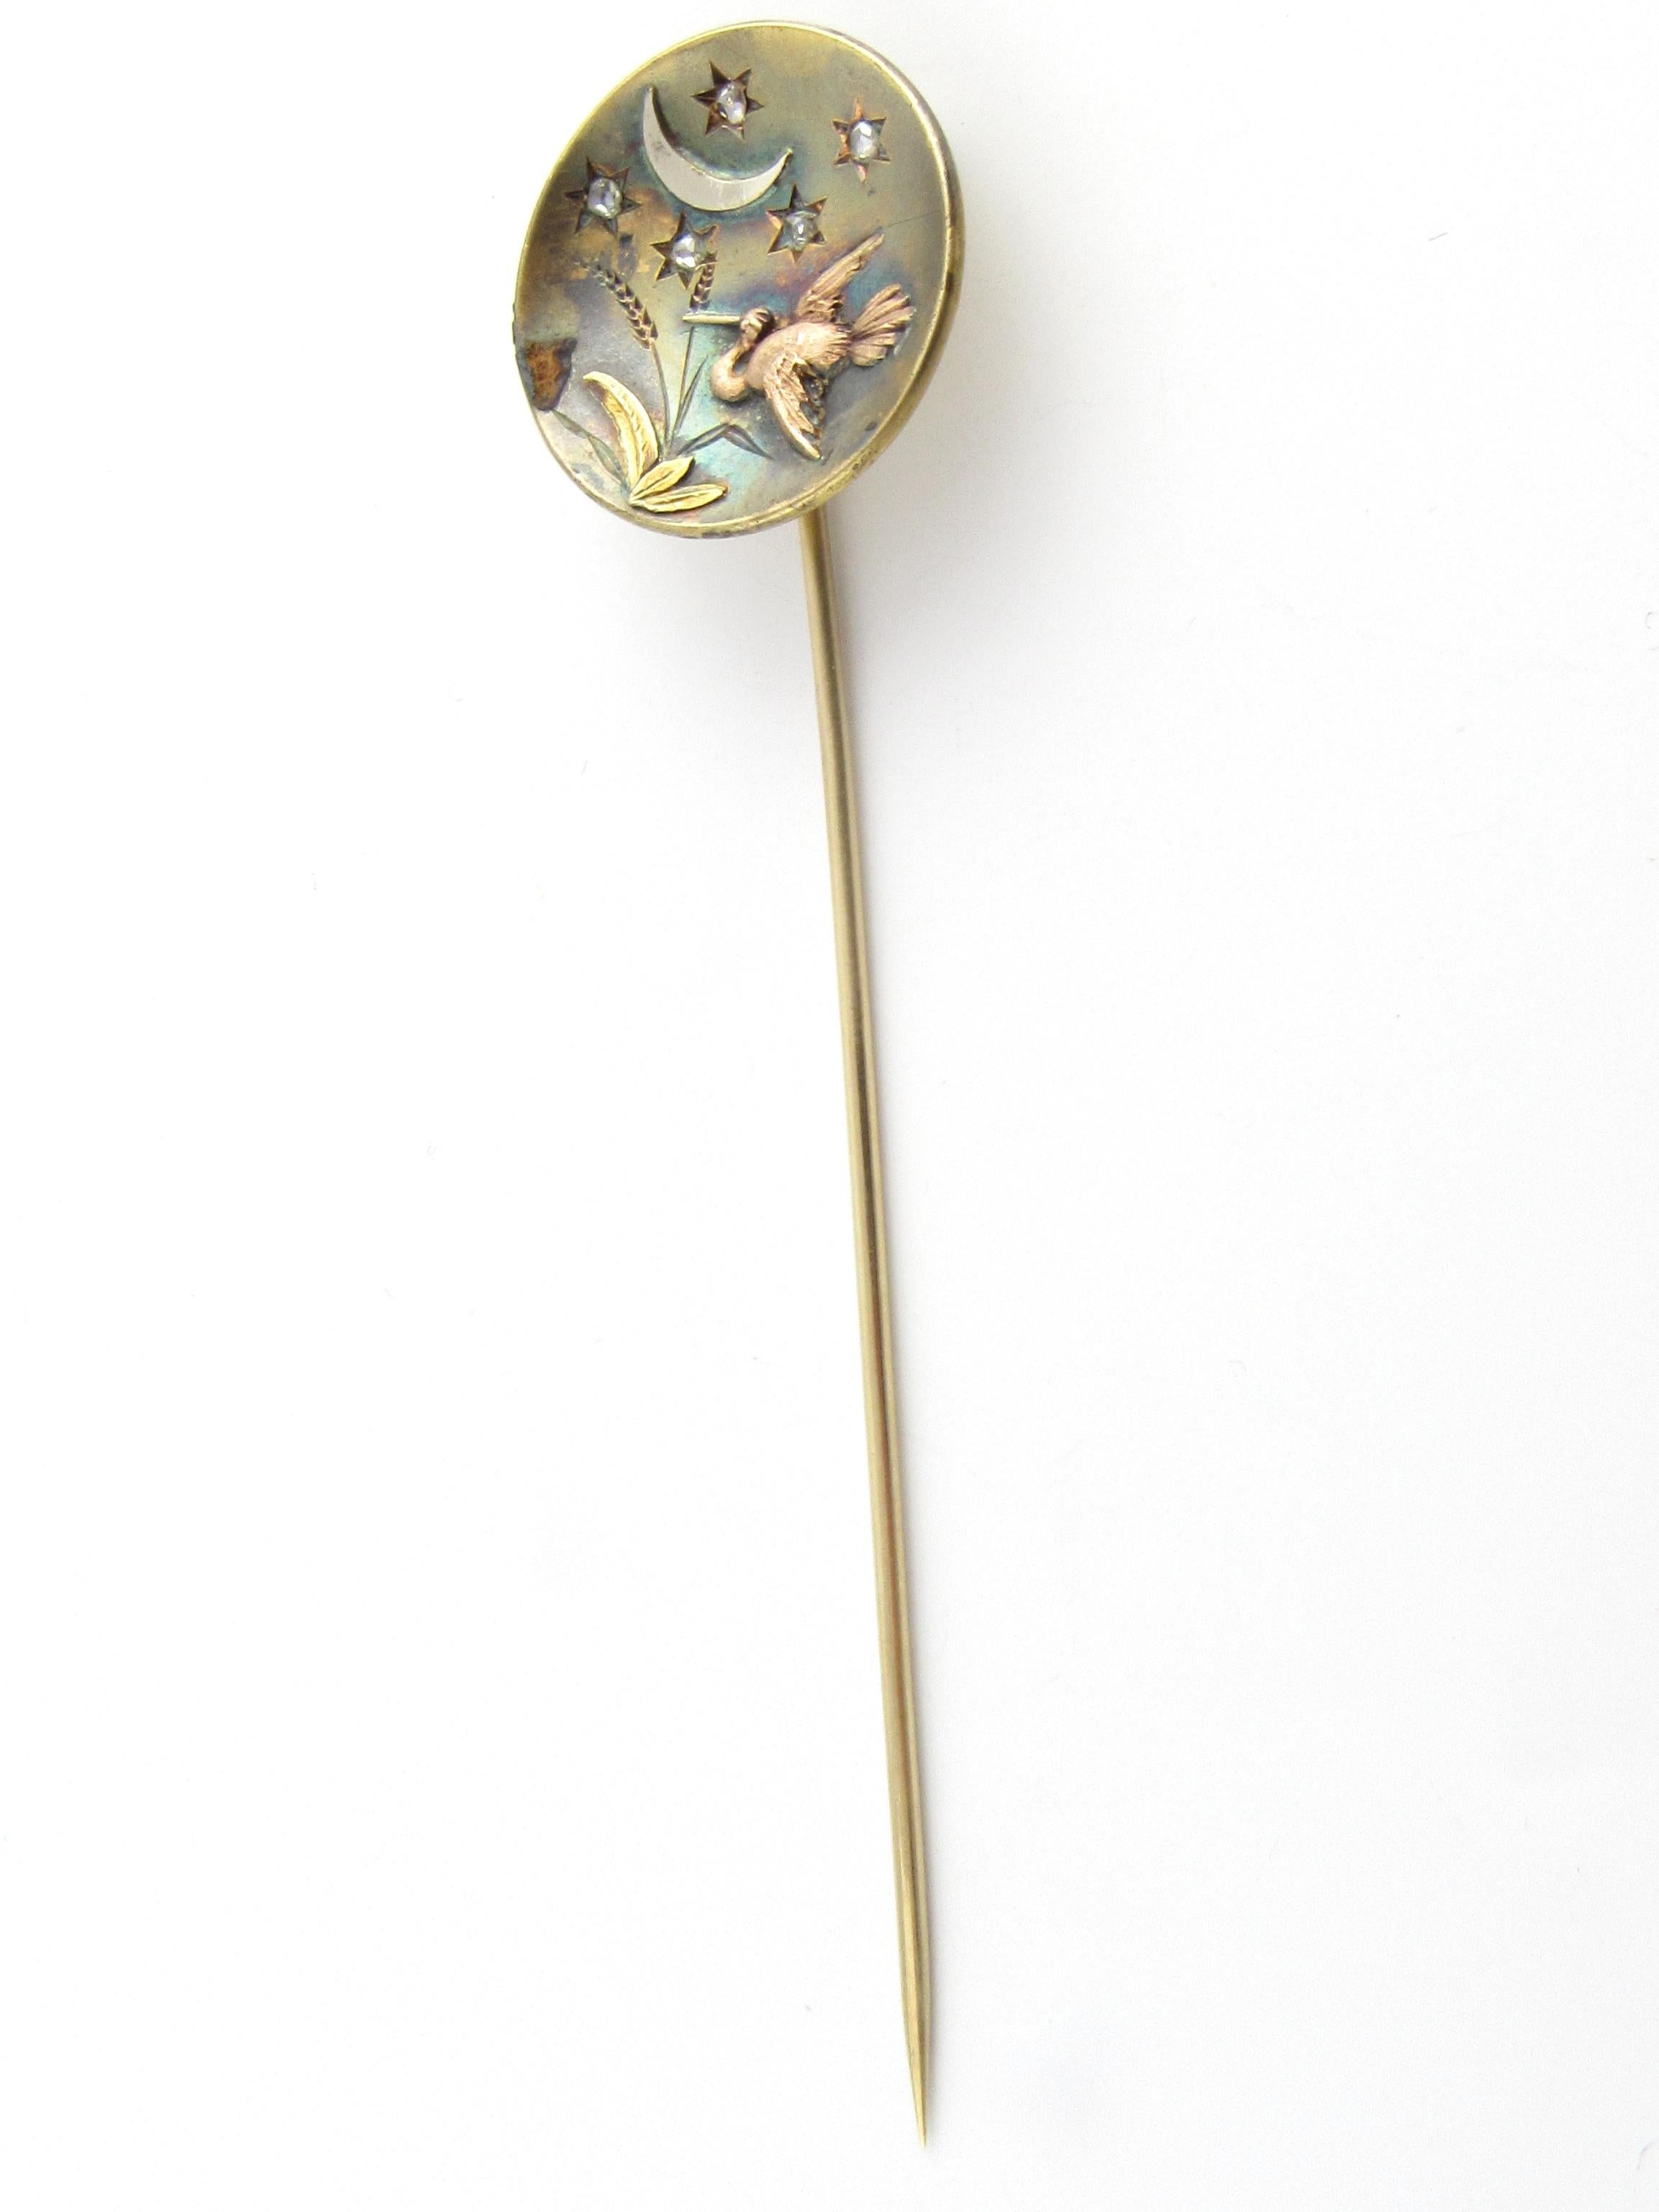 Vintage 14 Karat Yellow Gold and Diamond Stick Pin

This stunning stick pin features an elegant egret flying over a star-filled sky. Decorated with five round rose cut diamonds and set in classic 14K yellow gold.

Approximate total diamond weight: